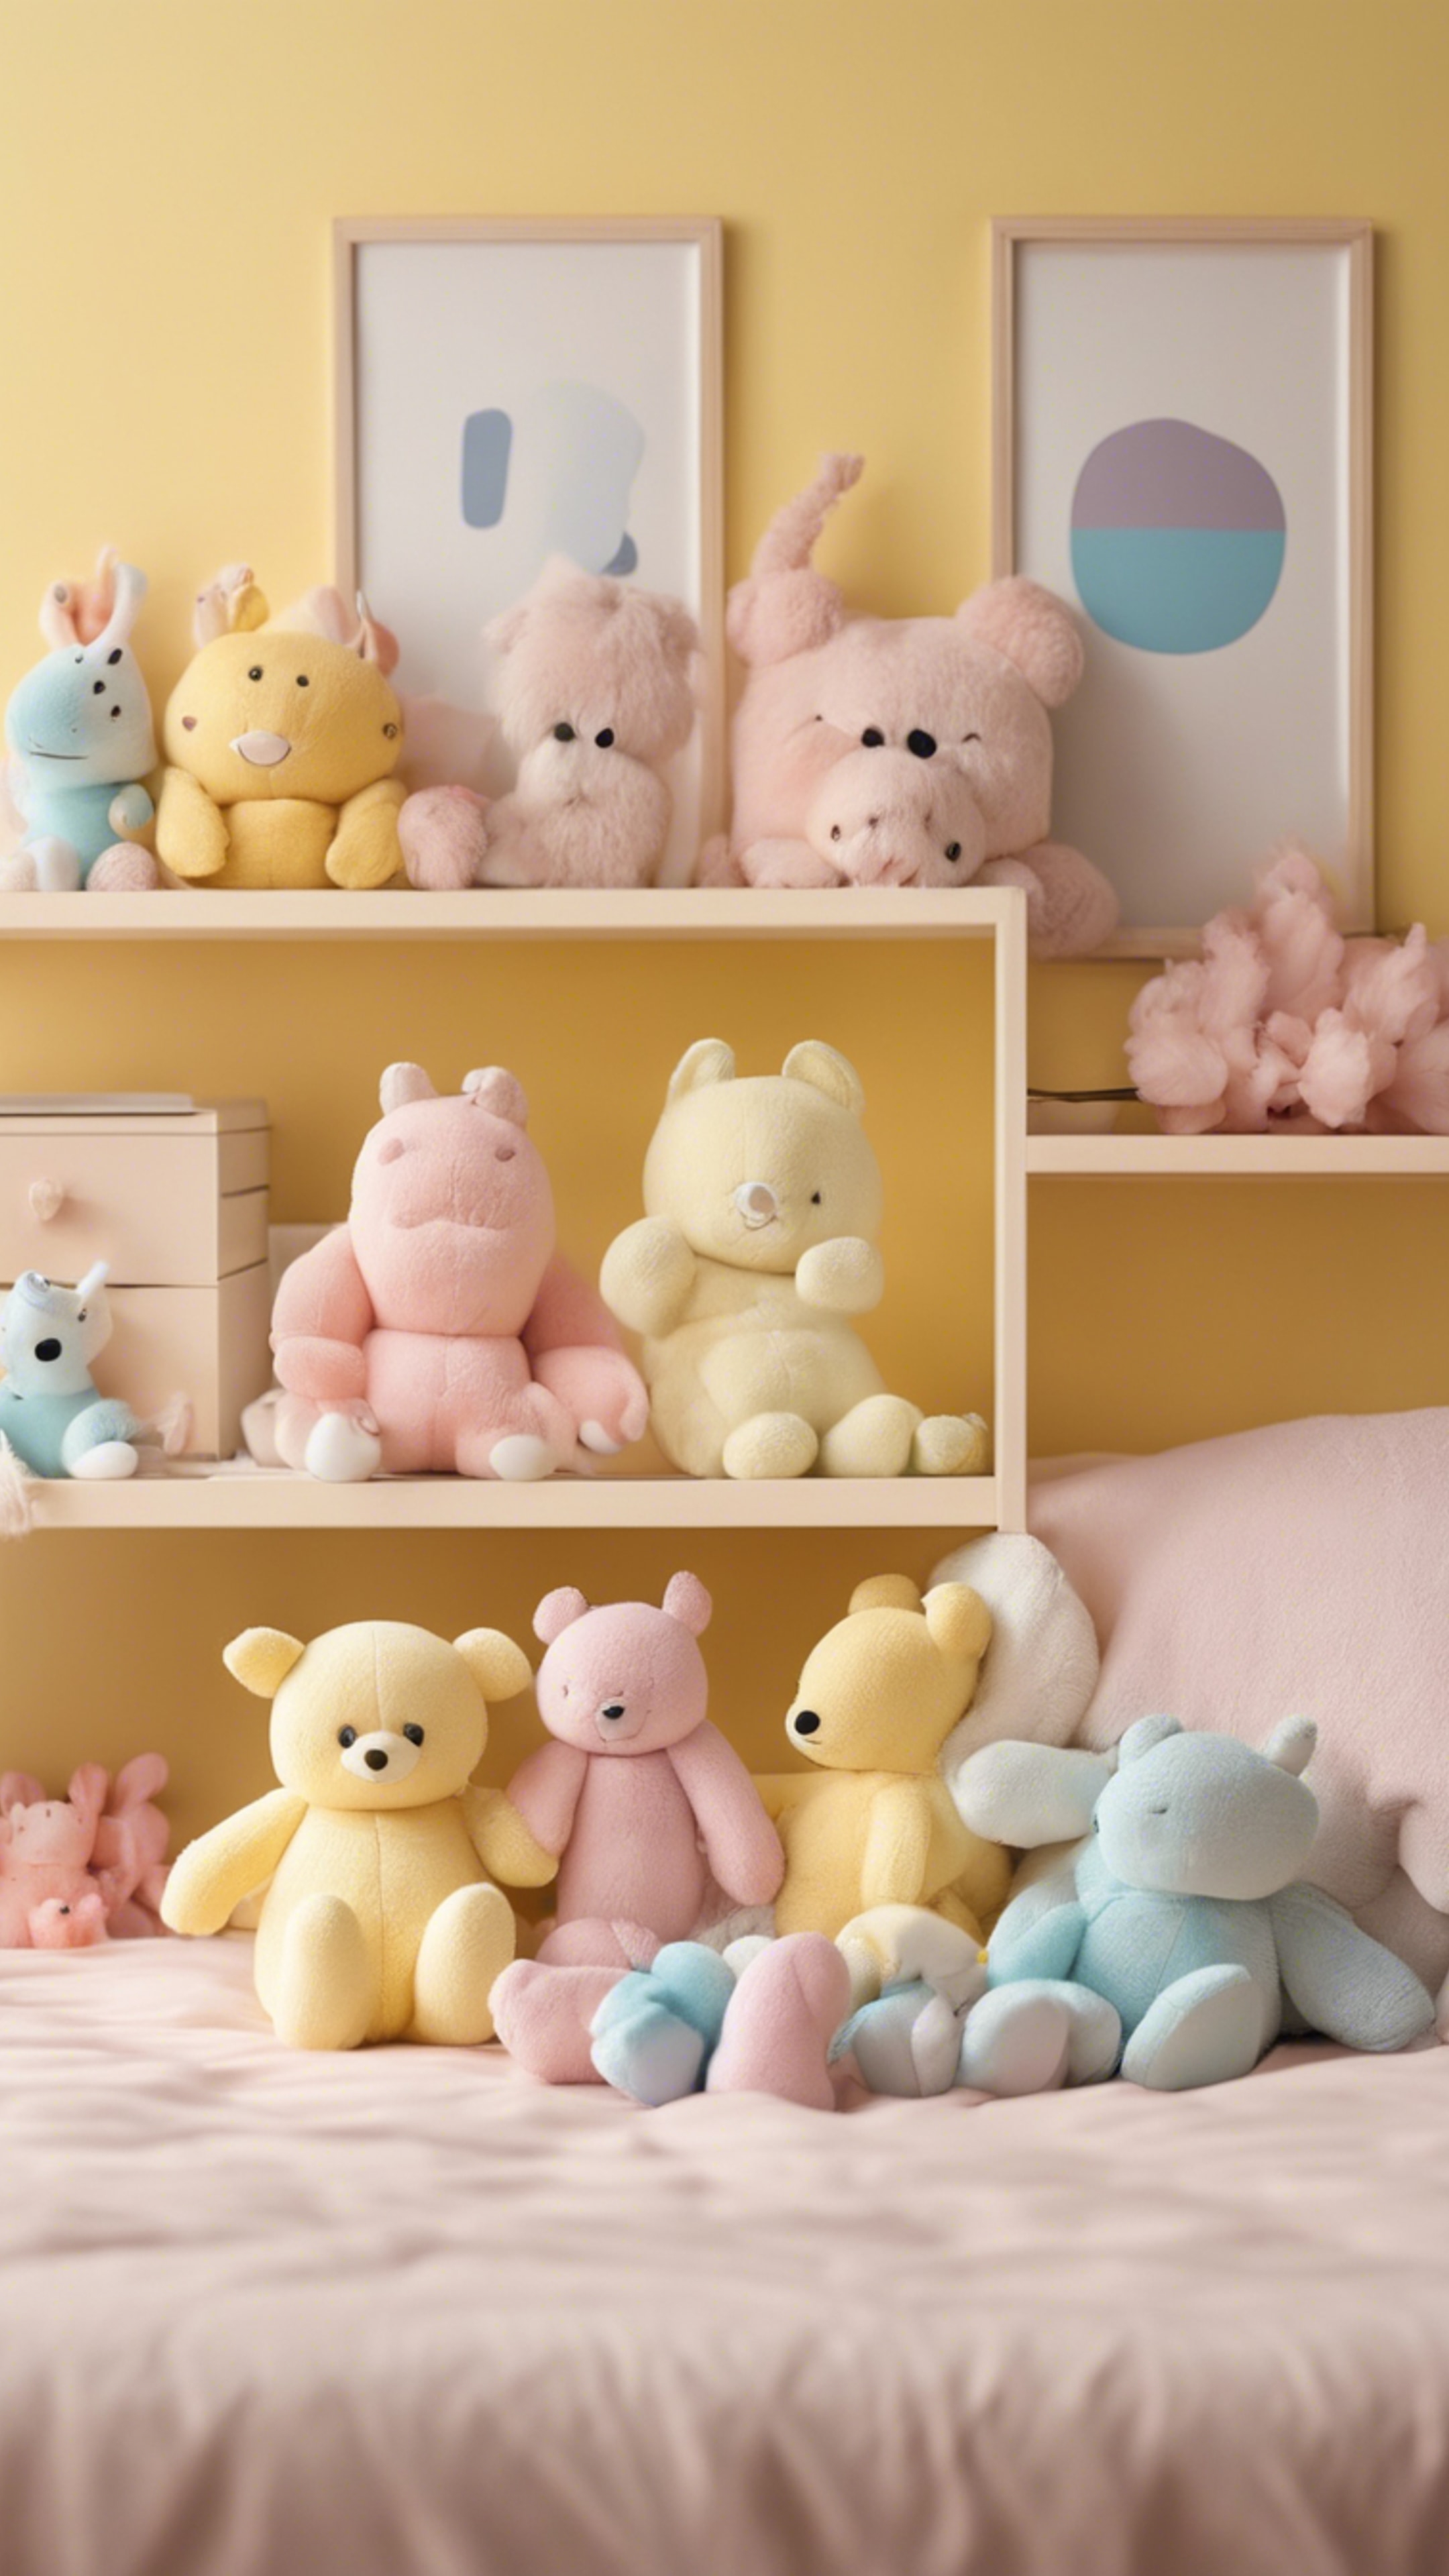 Tidy bedroom with pastel yellow walls decorated with kawaii plush toys. Tapeta[bea5098546c74f3e98b3]